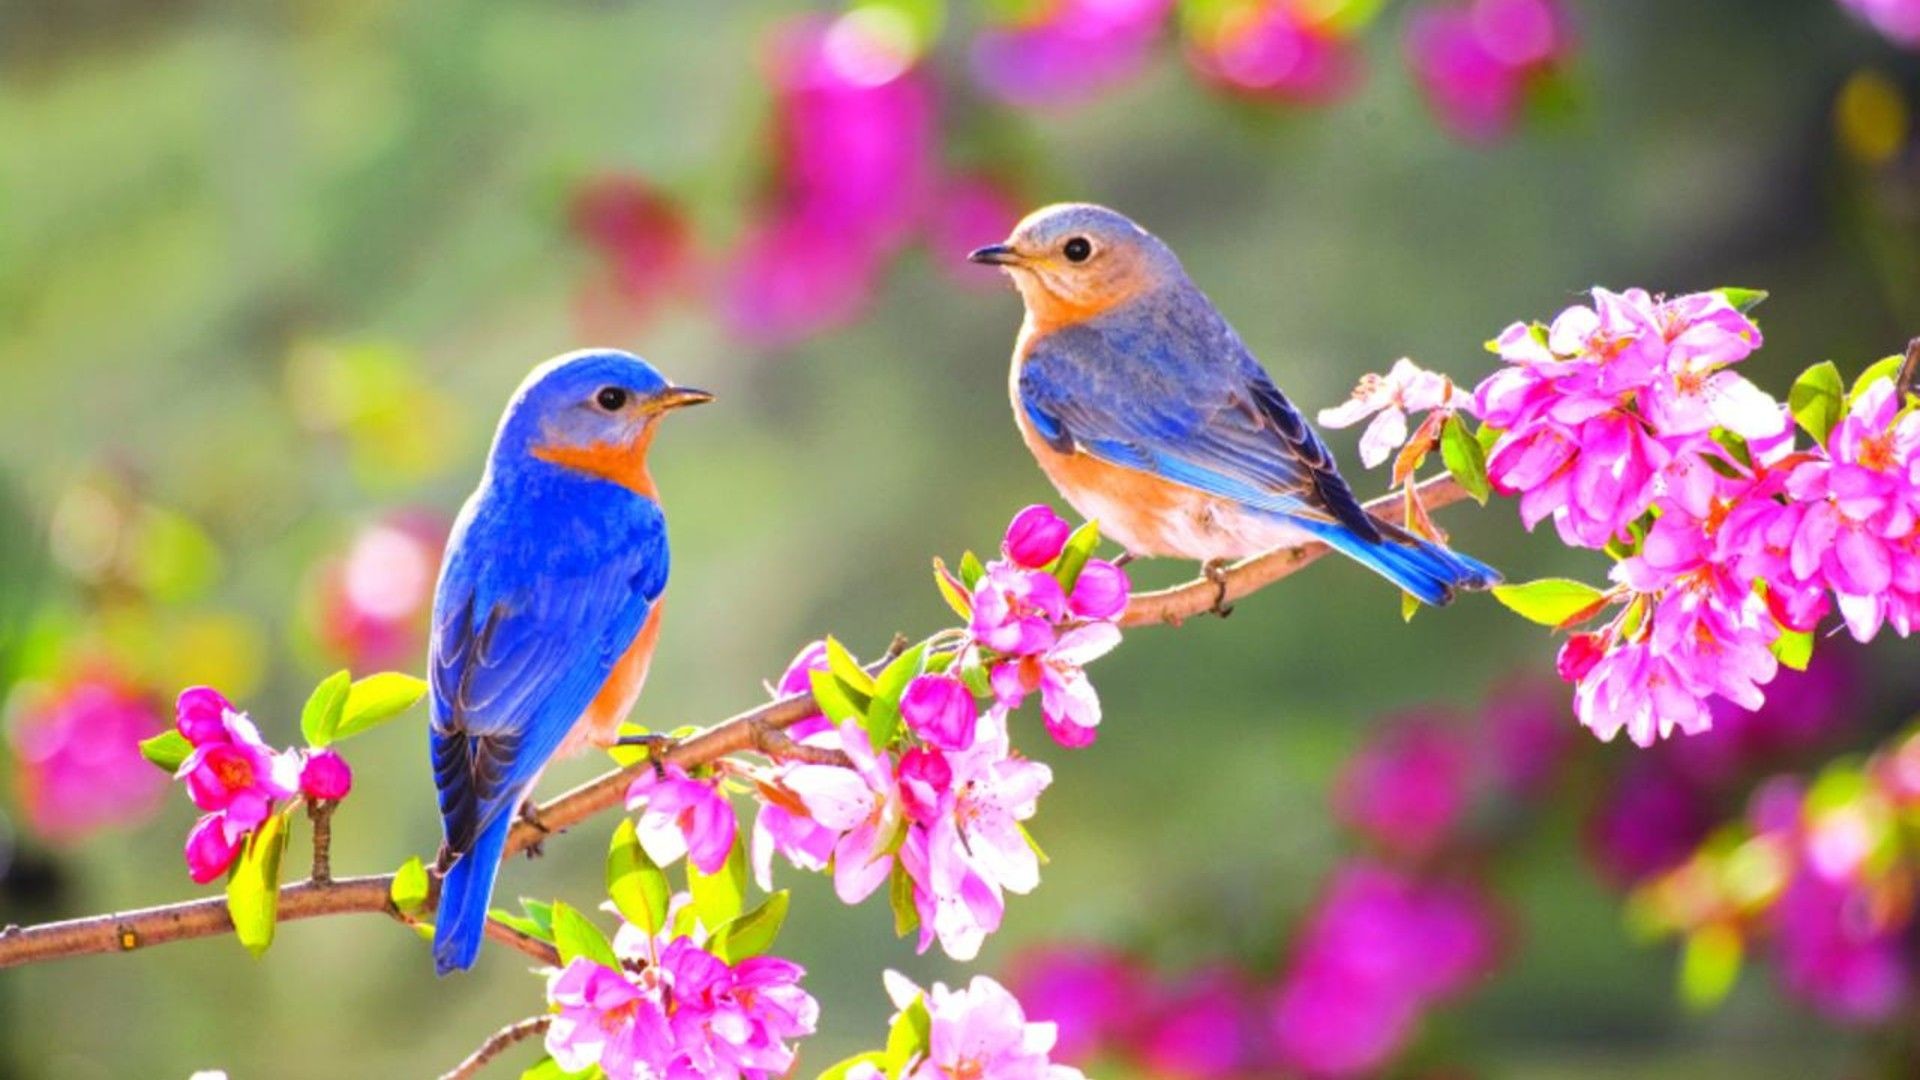 1920x1080 Wallpaper Download  Lovely two little blue birds on a blossom  branch. Animal Wallpapers. HD Wallpaper Download for iPad and iPhone  Widescreen 2160p